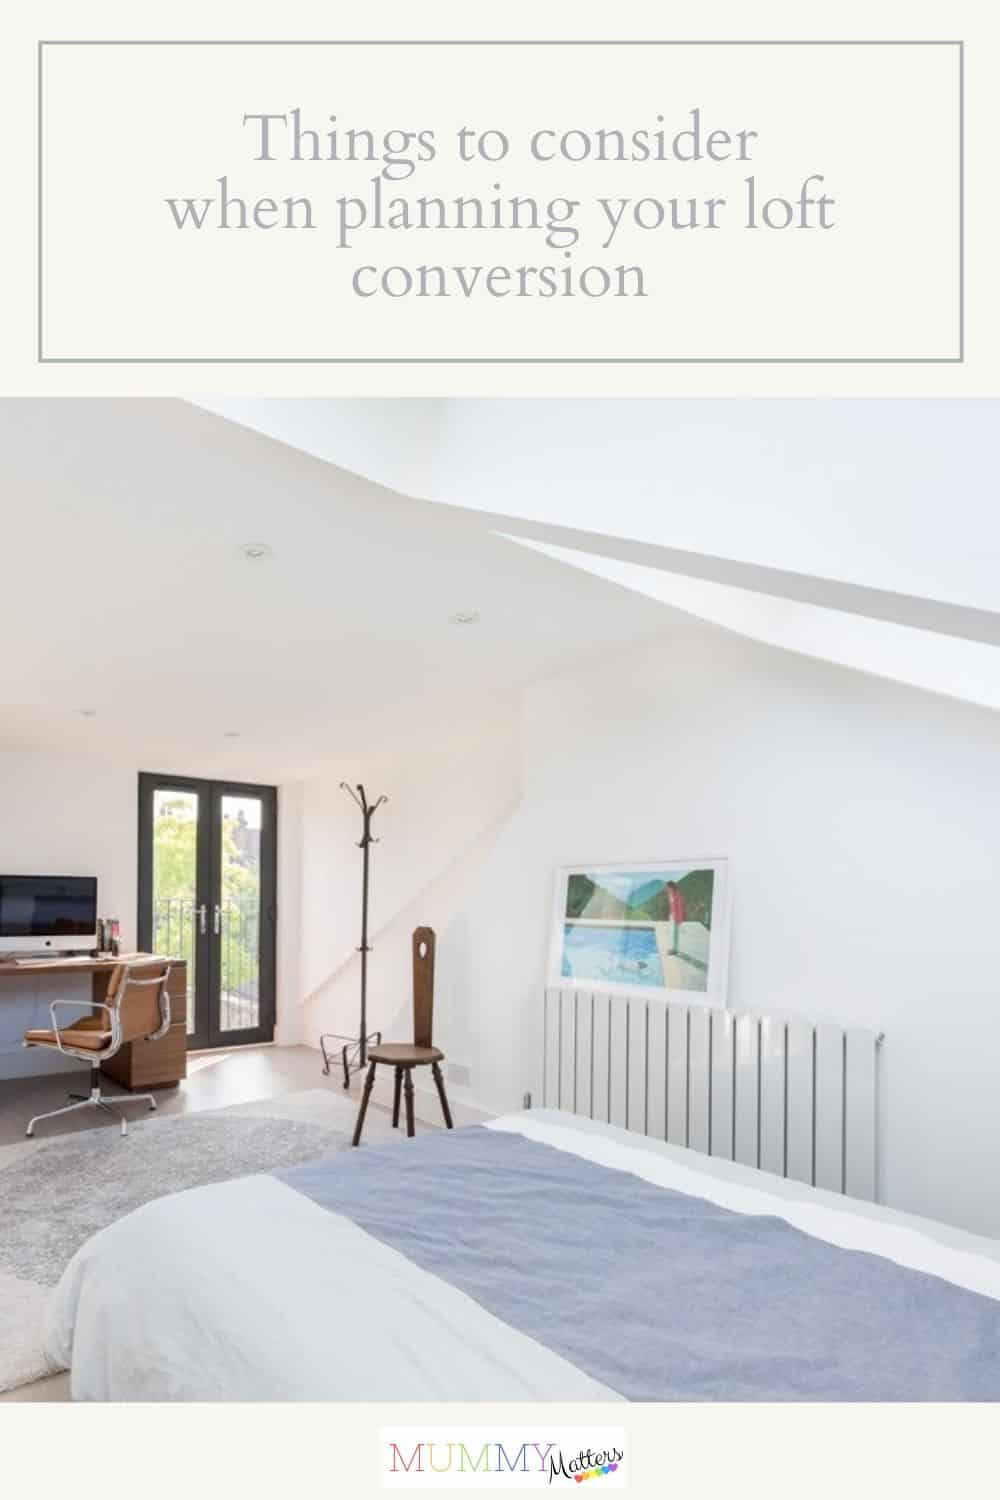 When planning your loft conversion, it can be difficult to know where to start. Here are some important considerations you should make first.